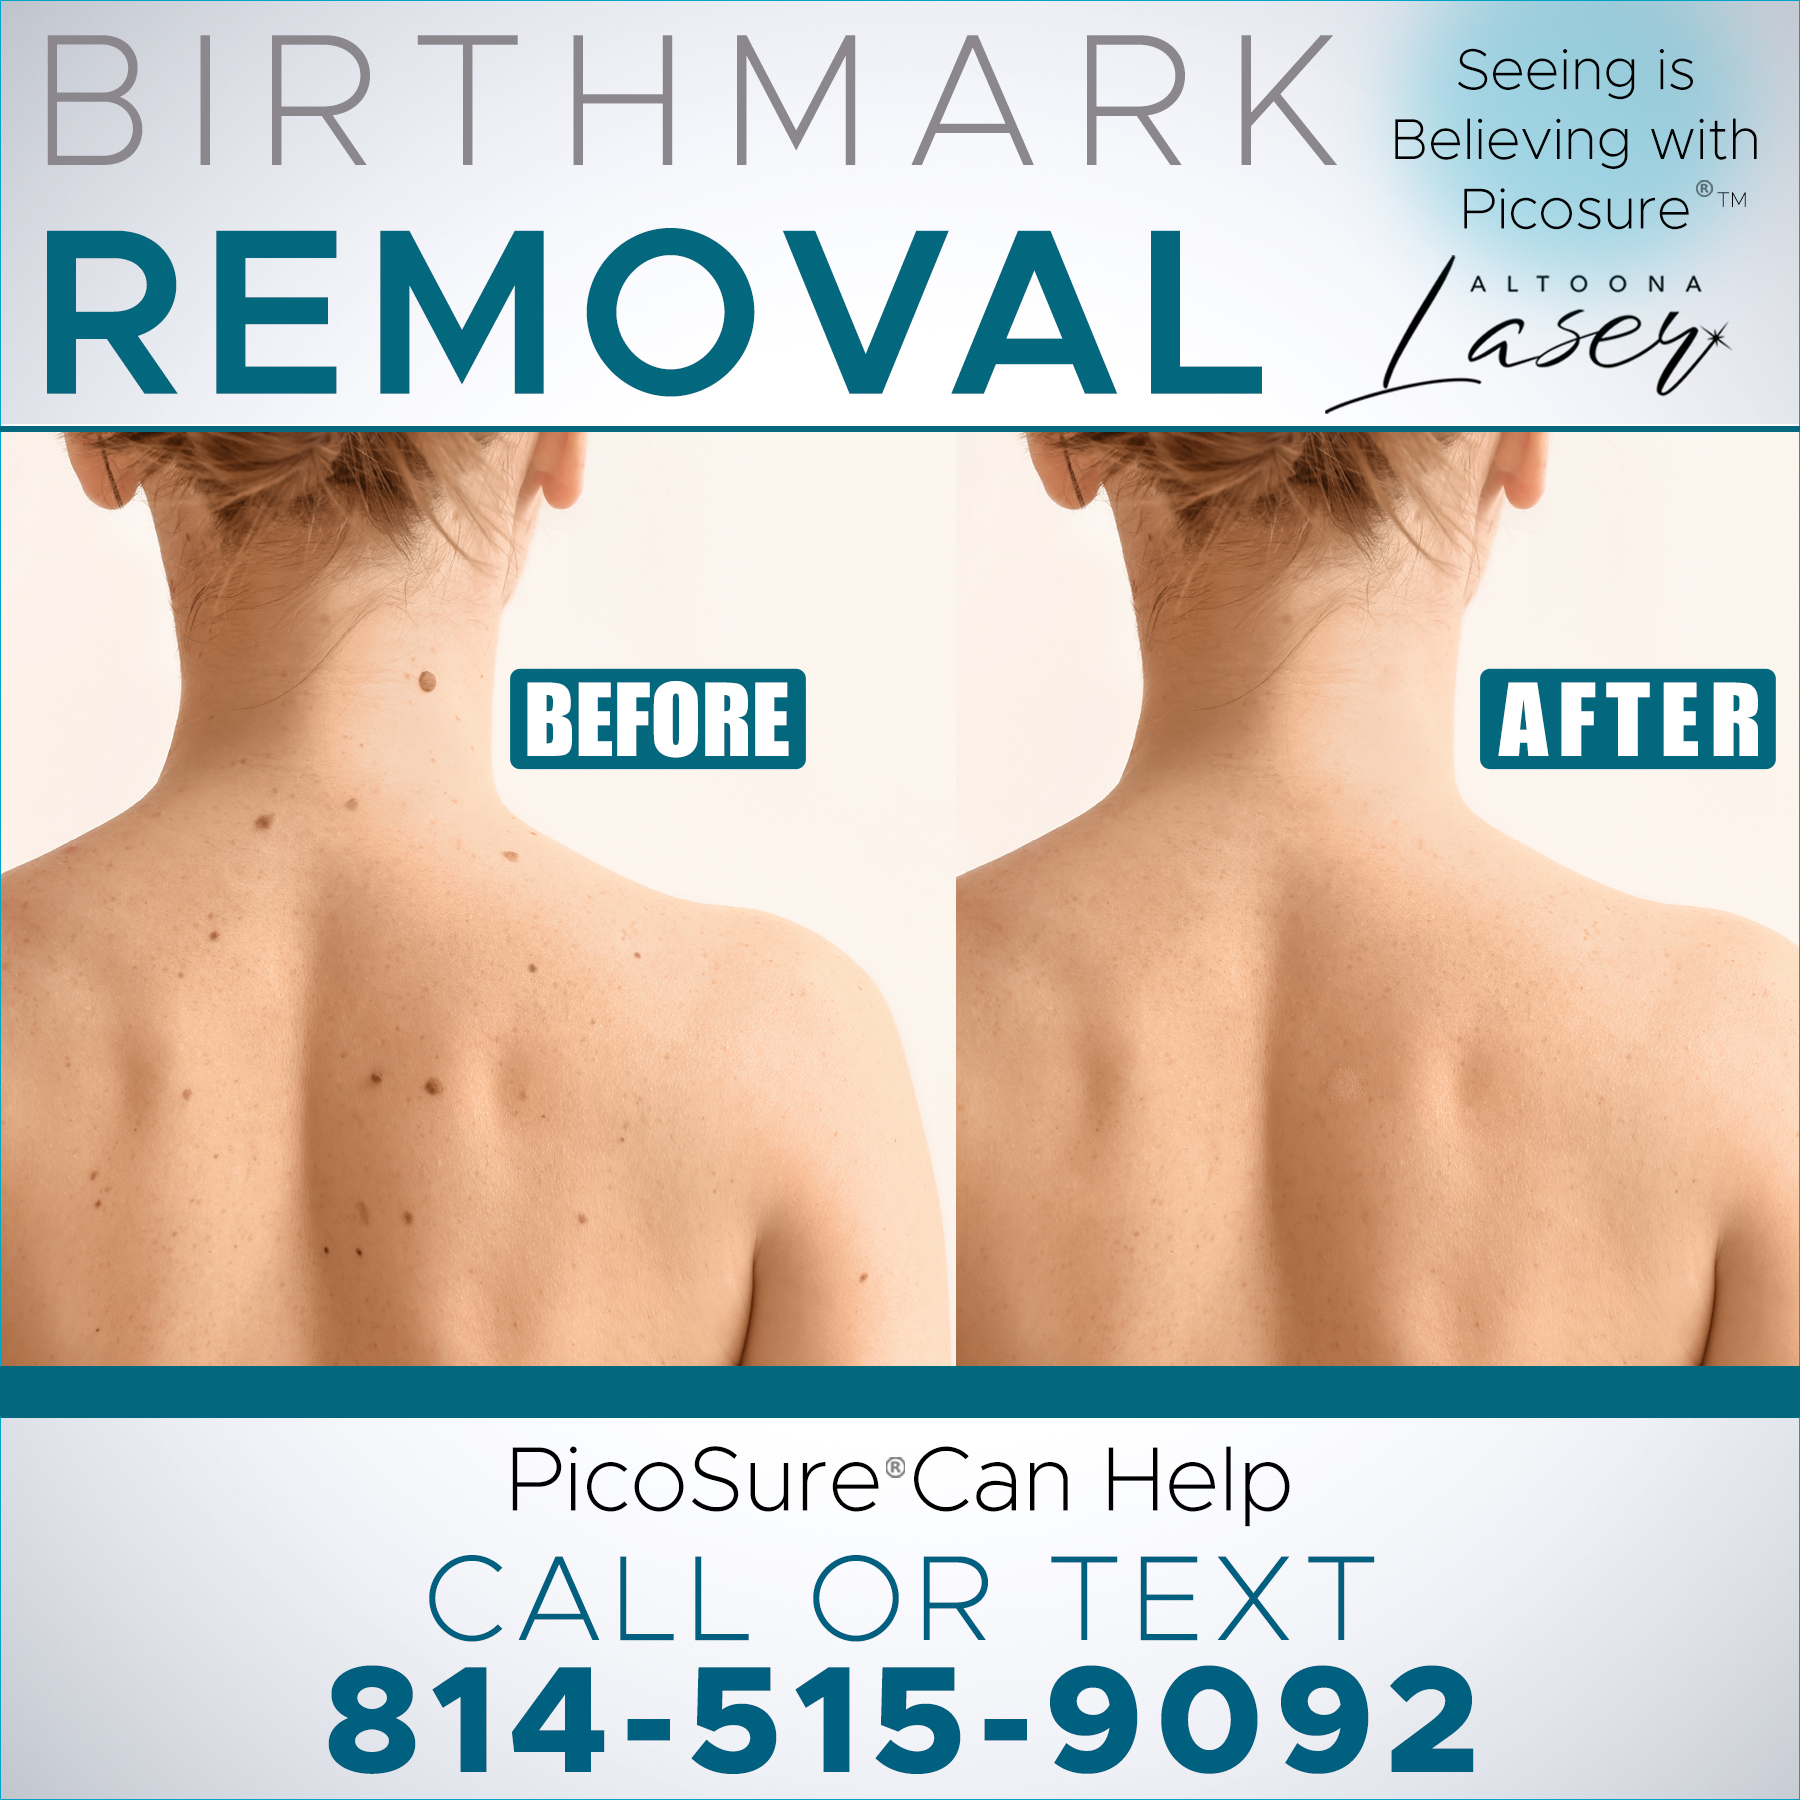 PicoSure- a safe, effective way to remove skin blemishes or tattoos.